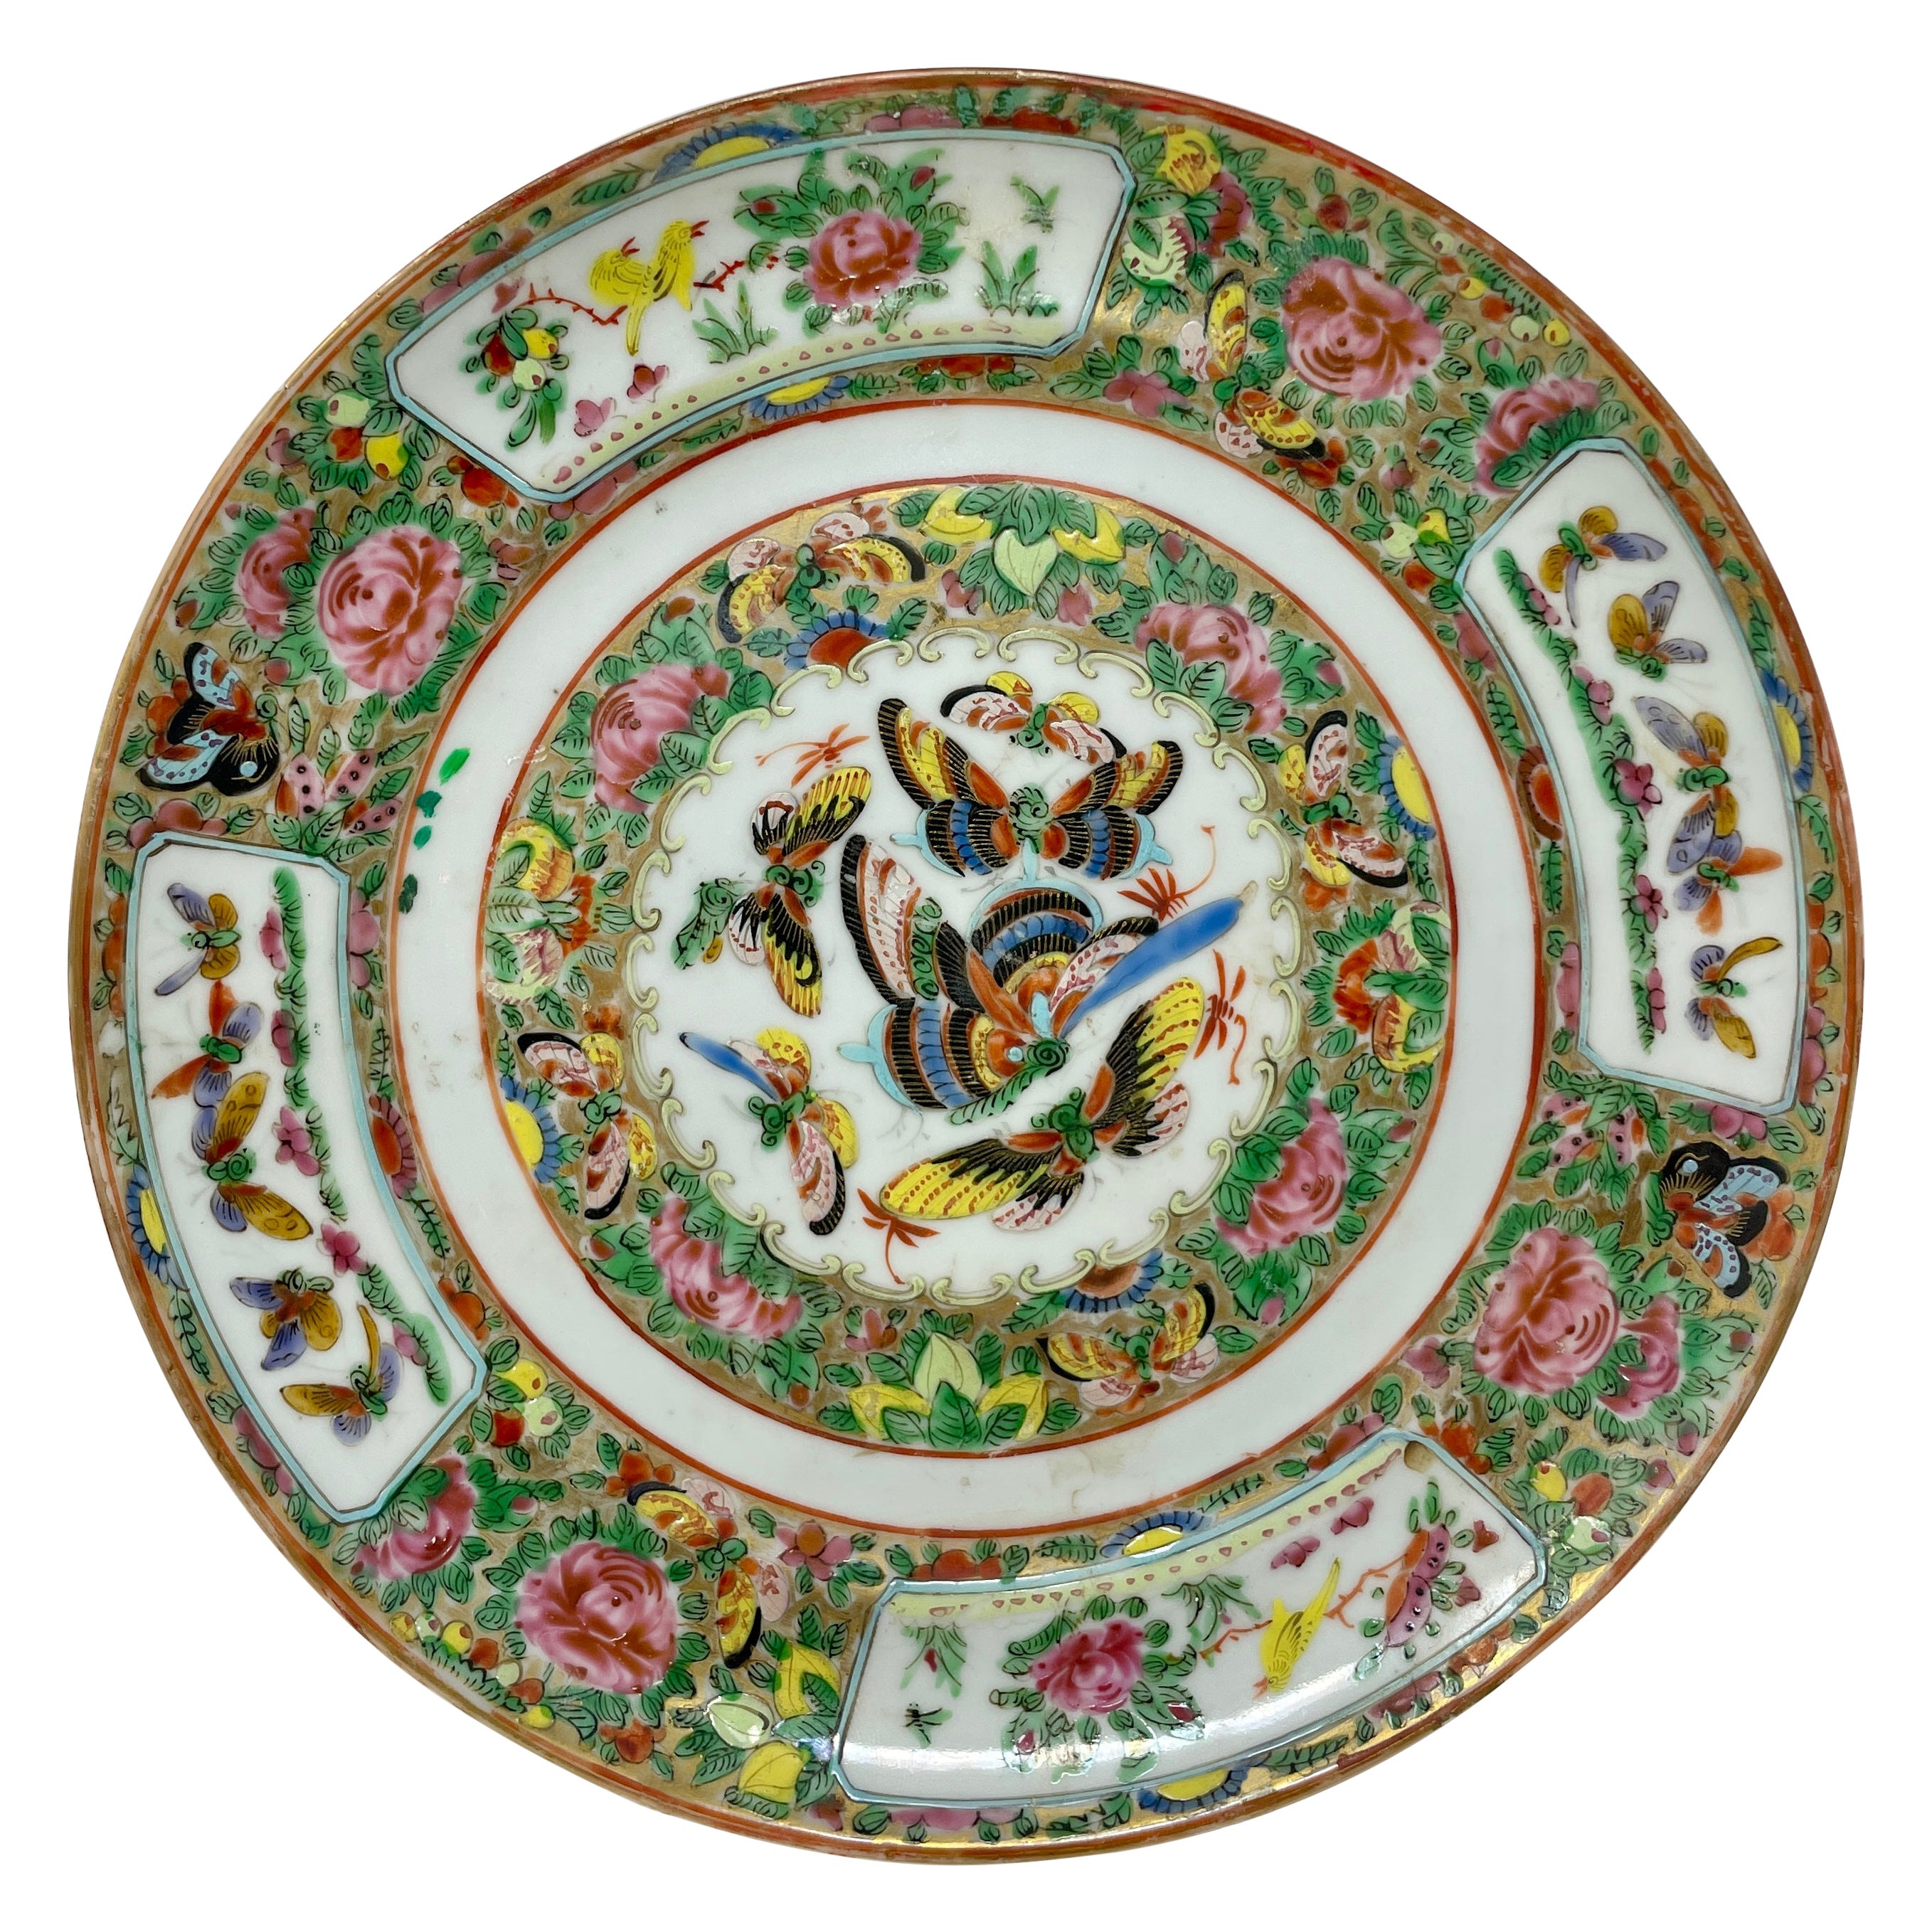 Antique Chinese "Rose Medallion" Porcelain Plate with Butterflies, Ca 1880-1890